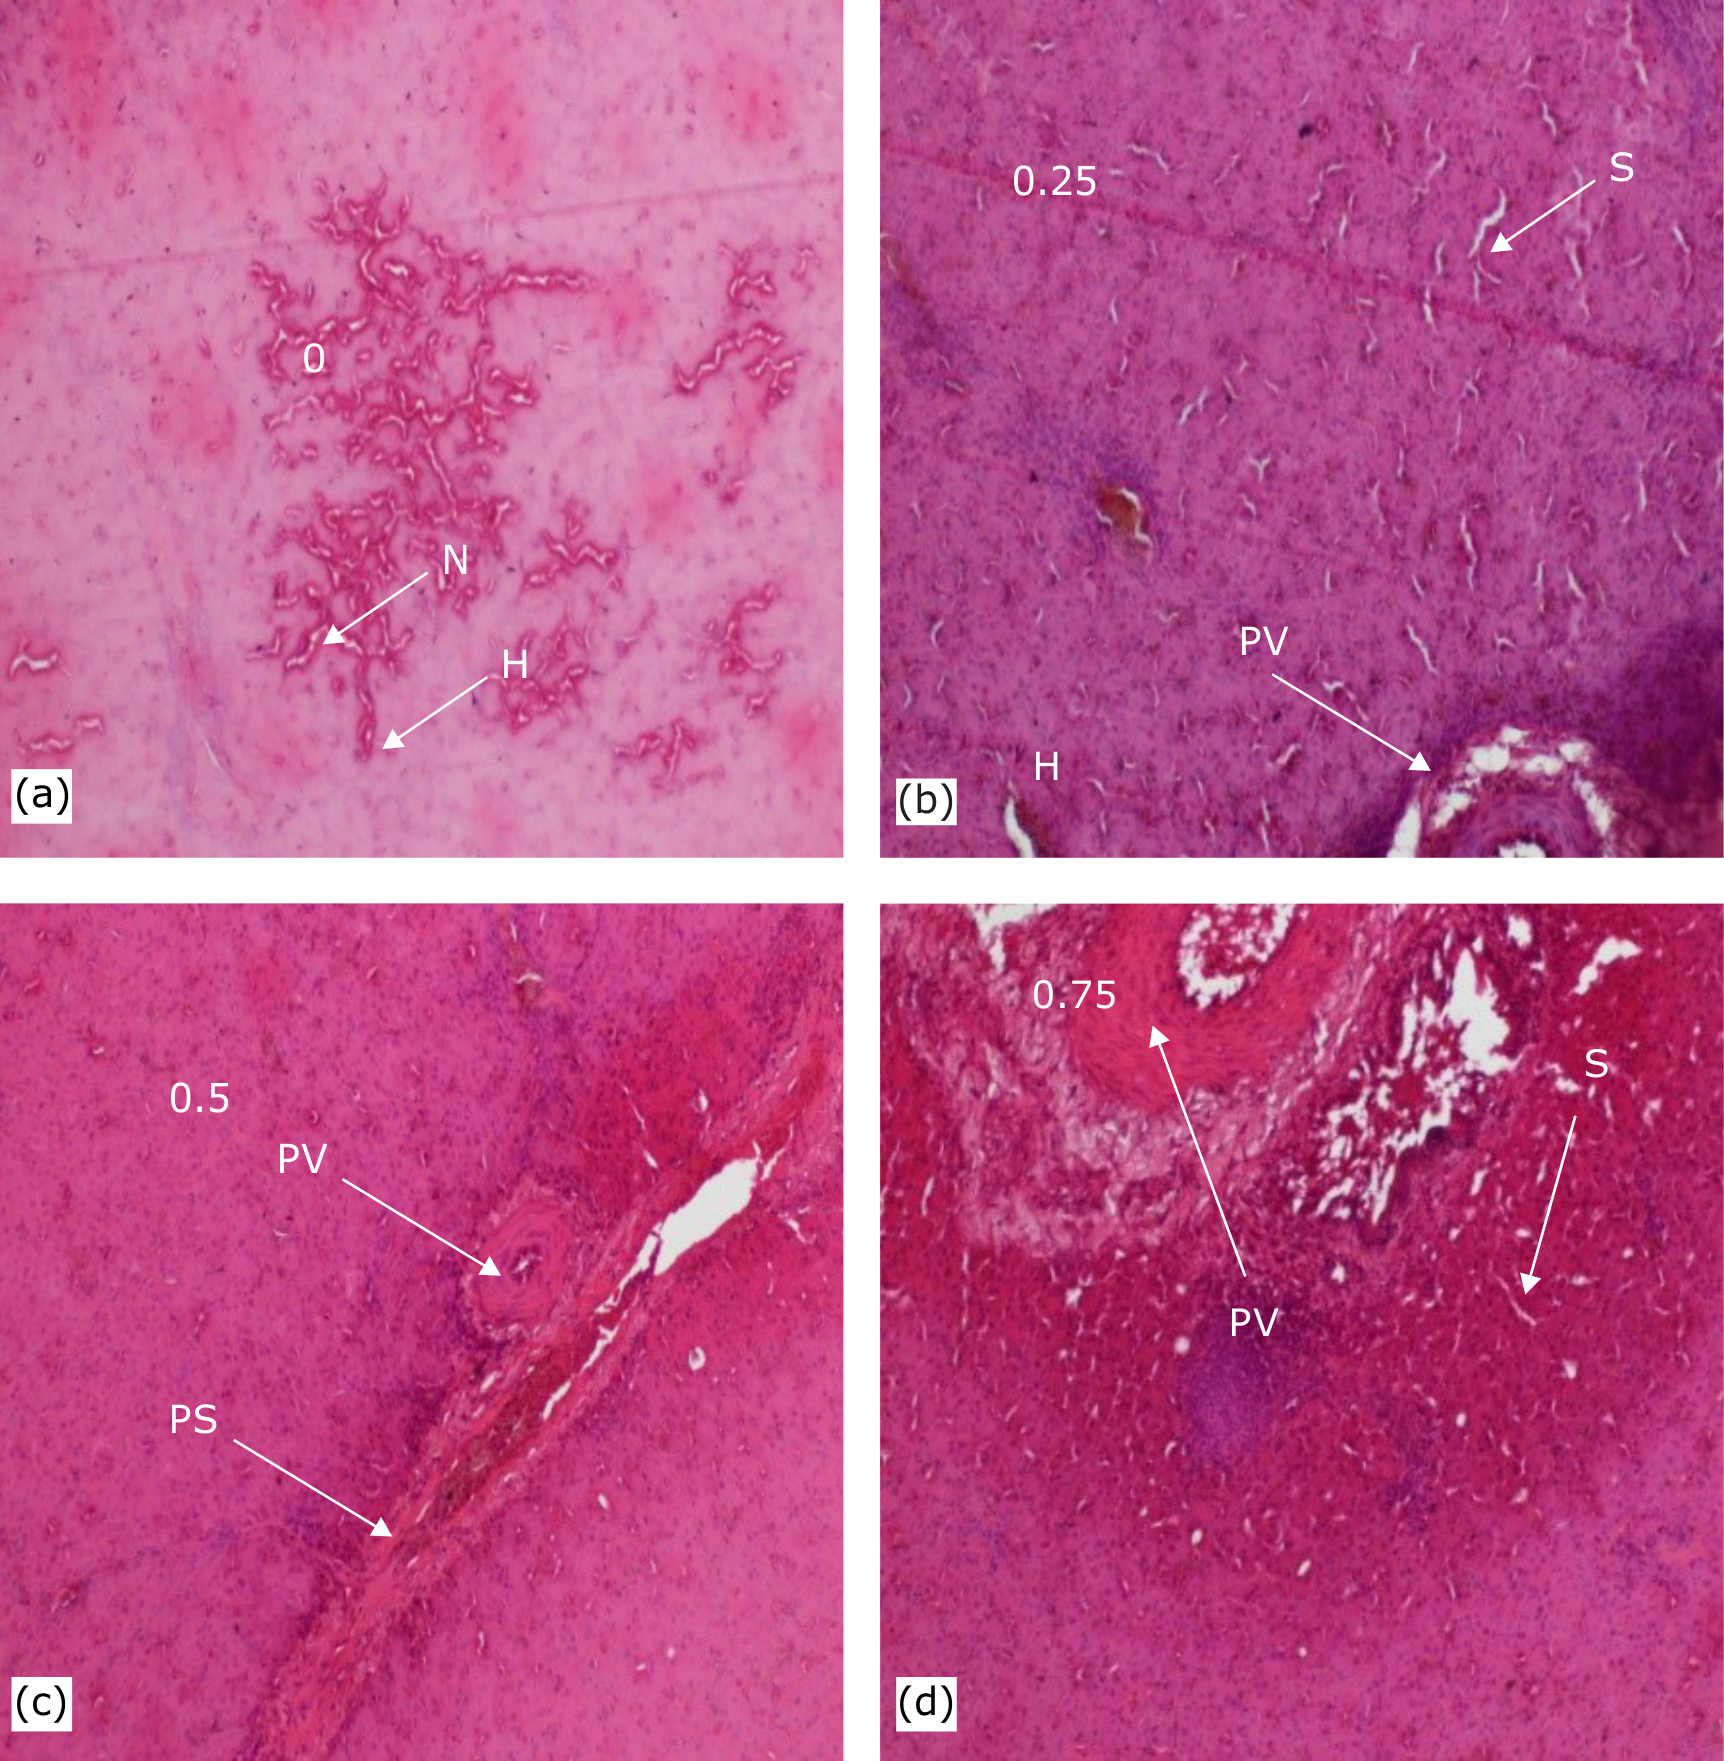 Fig. 1(a-d): Effects of Mangifera indica leaf powder in feed on liver histology in Brahma hen. 0 (control), 0.25, 0.5 and 0.75: Doses of Mangifera indica leaf powder (g), PS: Portal space, H: Hepatocyte, N: Necrosis, S: Sinusoid and PV: Portal vein